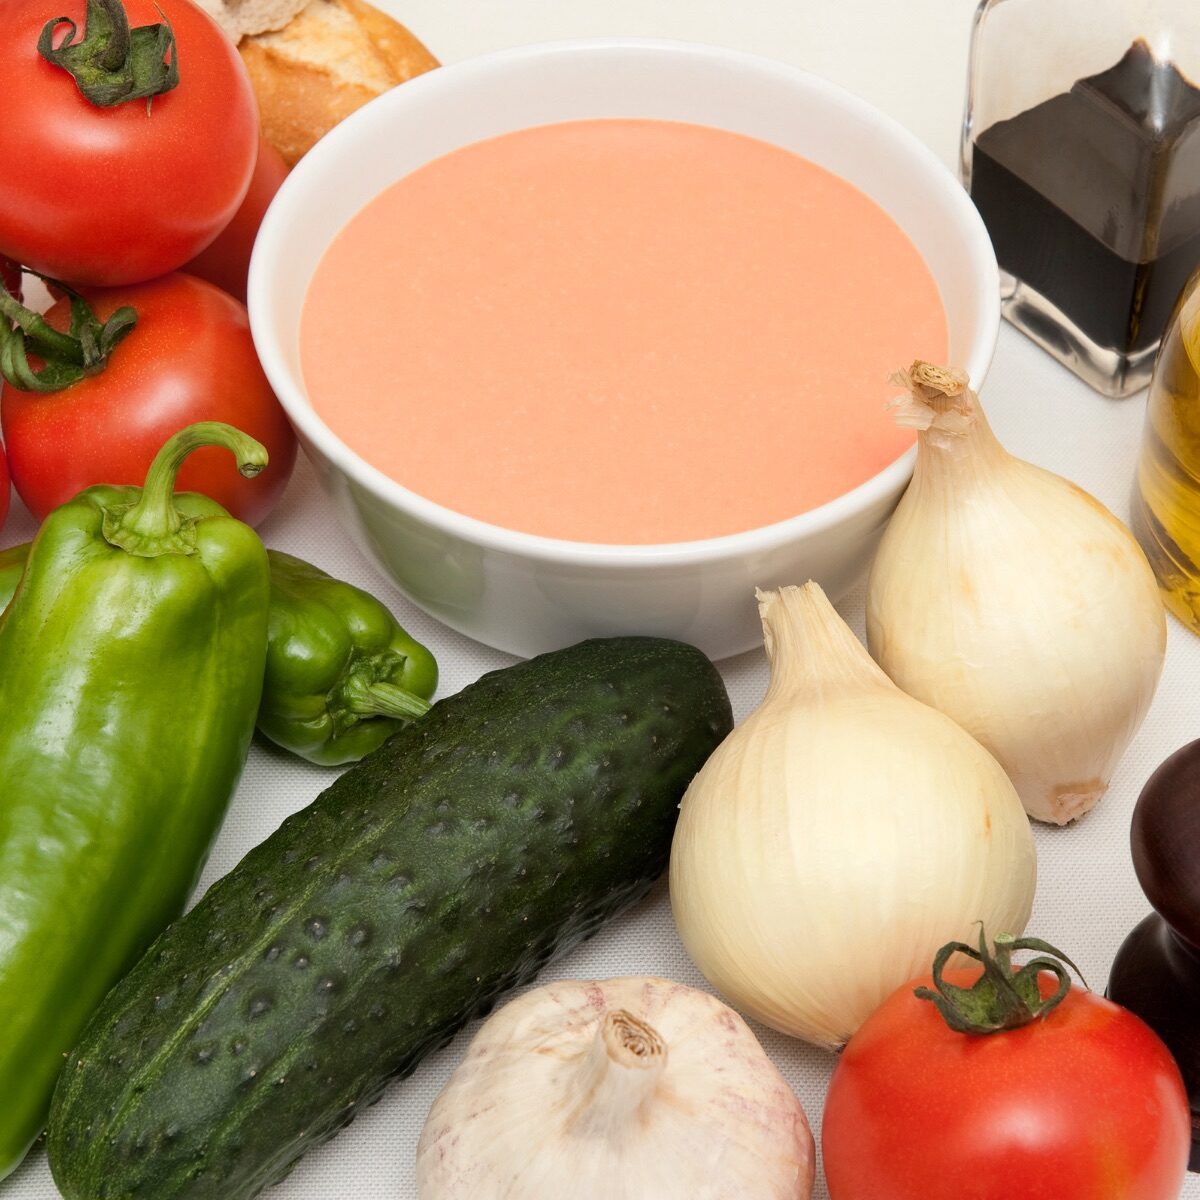 Ingredients for traditional gazpacho, including cucumber, pepper, tomatoes, onions, oil, vinegar and garlic.